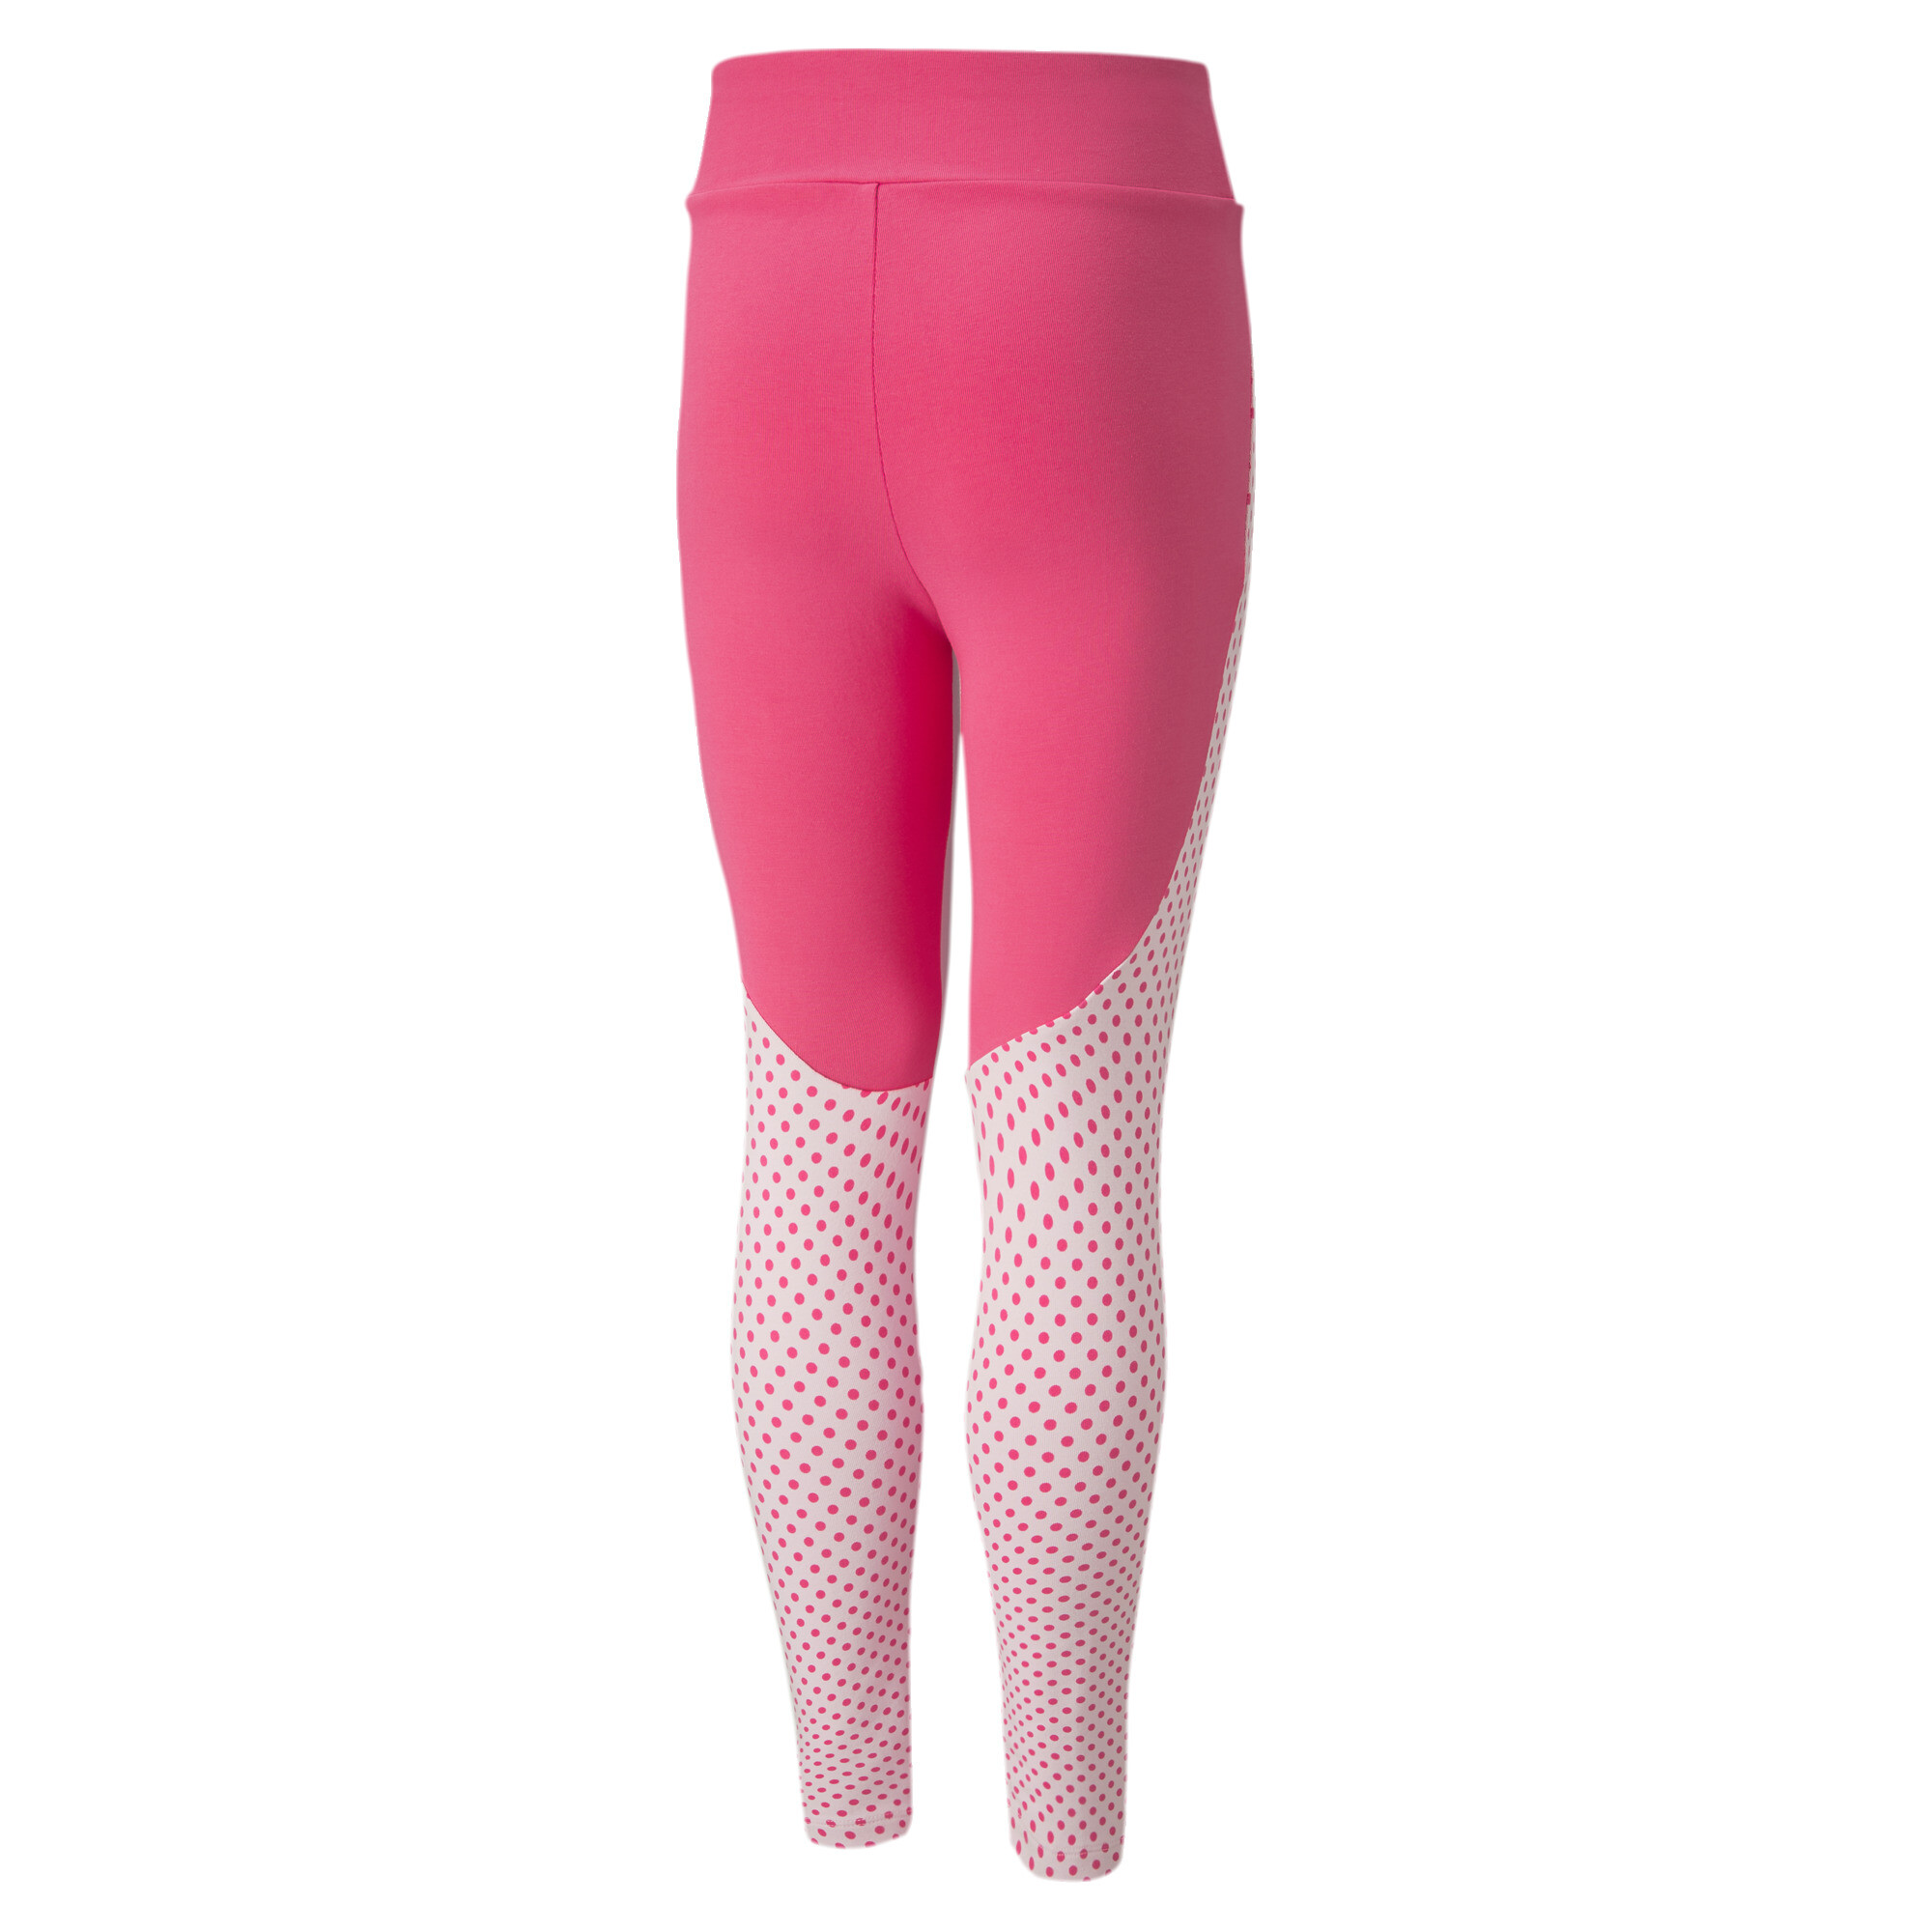 PUMA X MIRACULOUS Leggings In Pink, Size 11-12 Youth